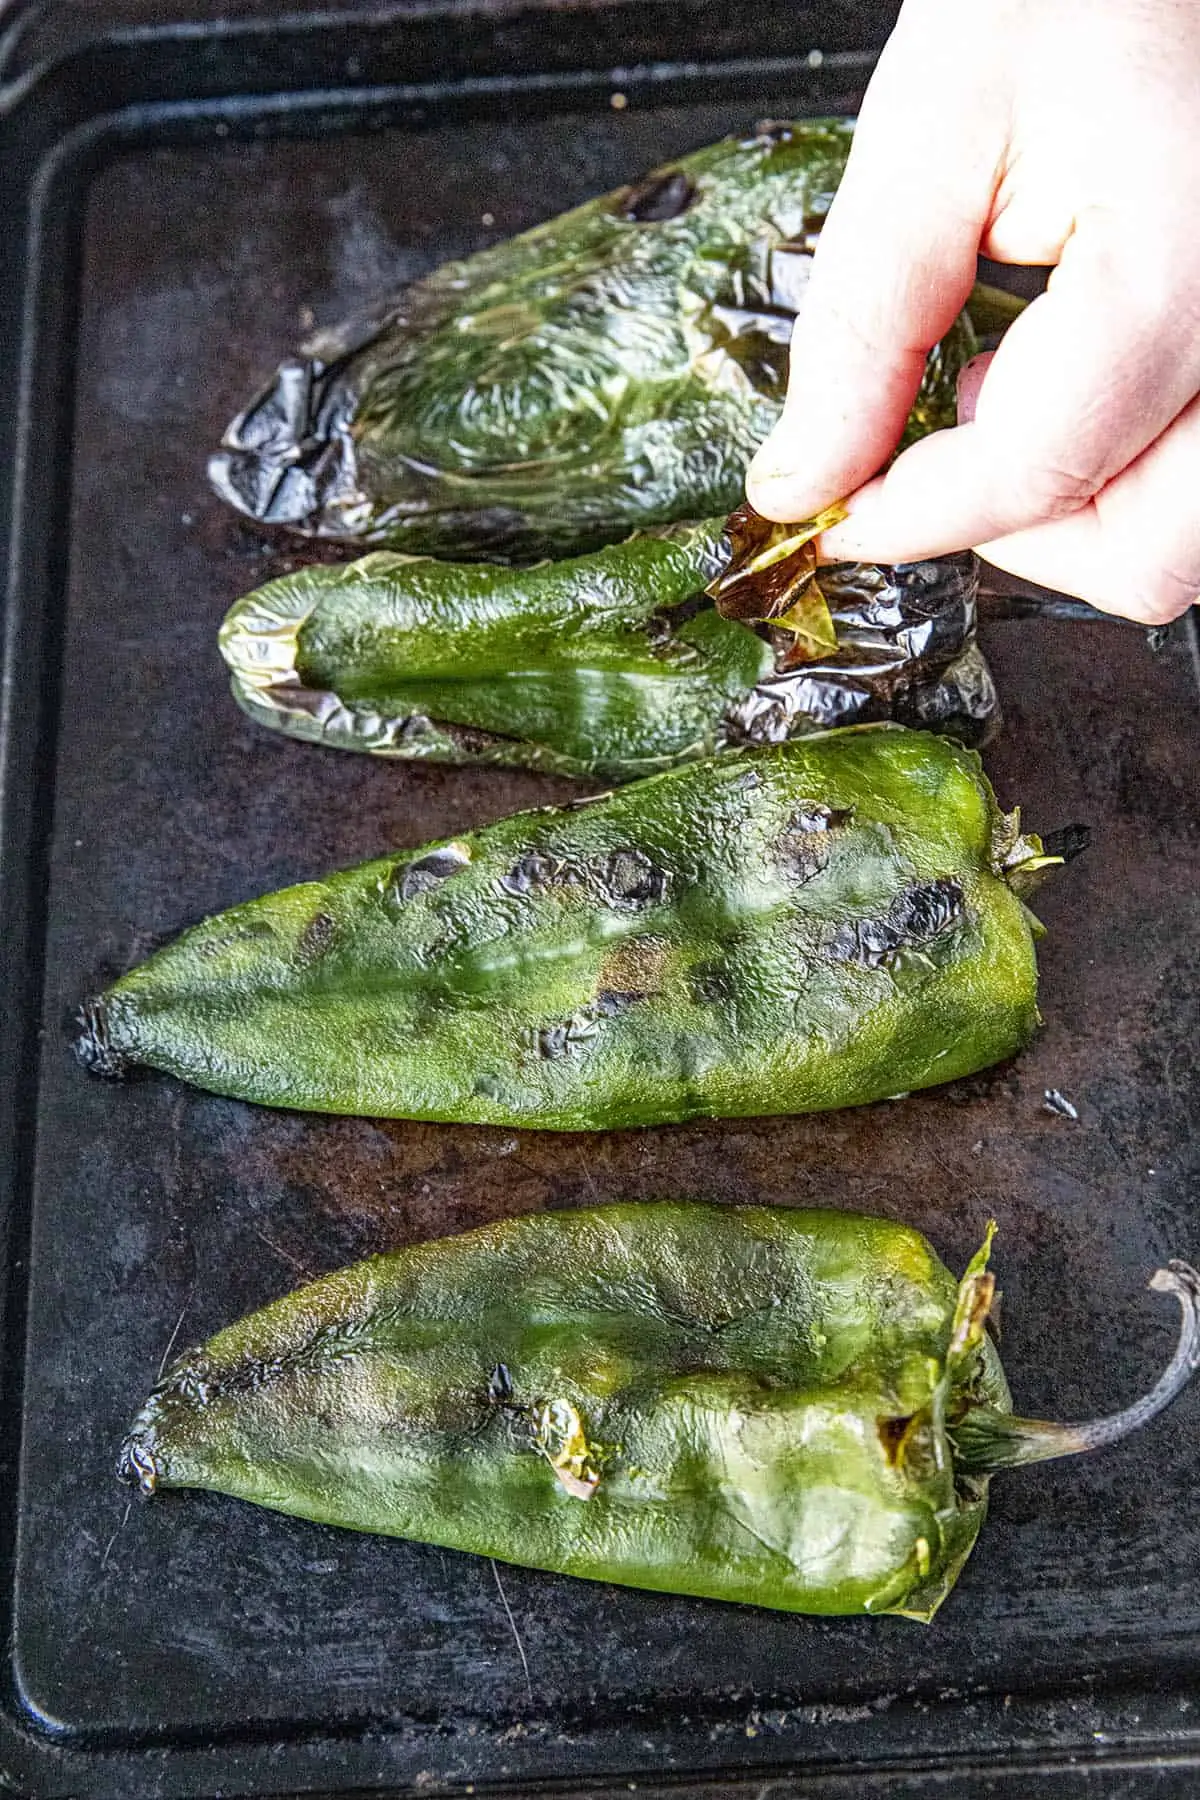 Peeling the grilled poblano peppers